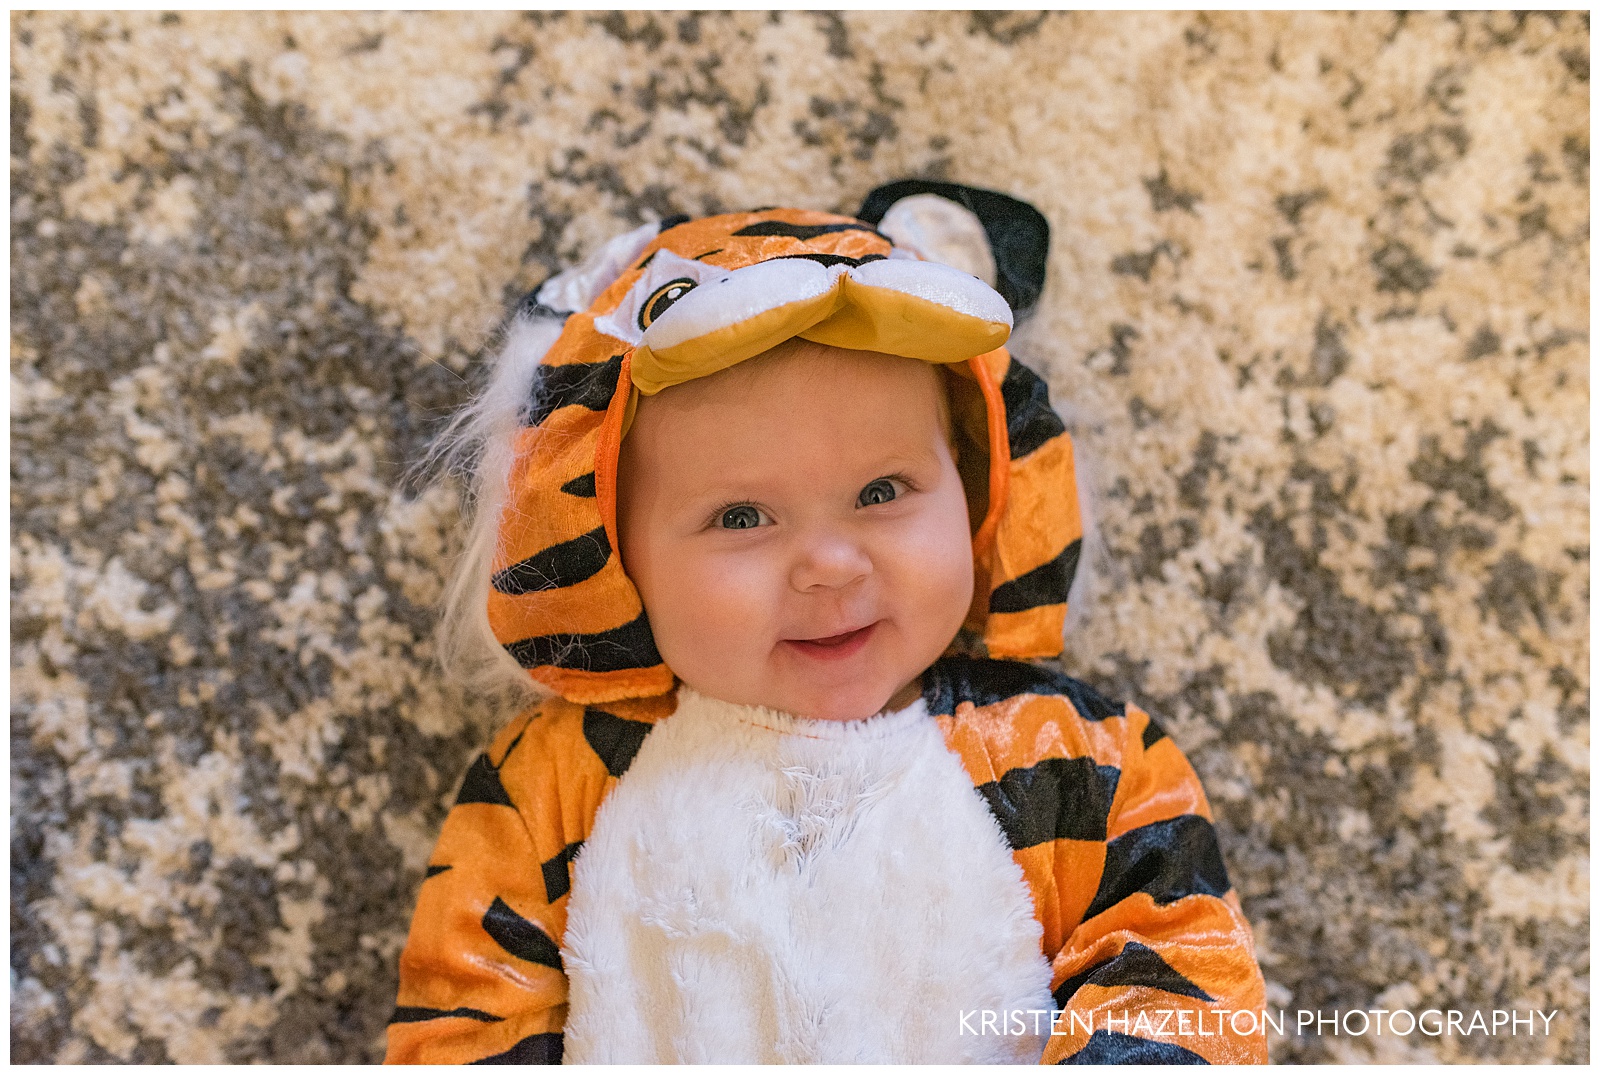 Baby dressed in a tiger costume